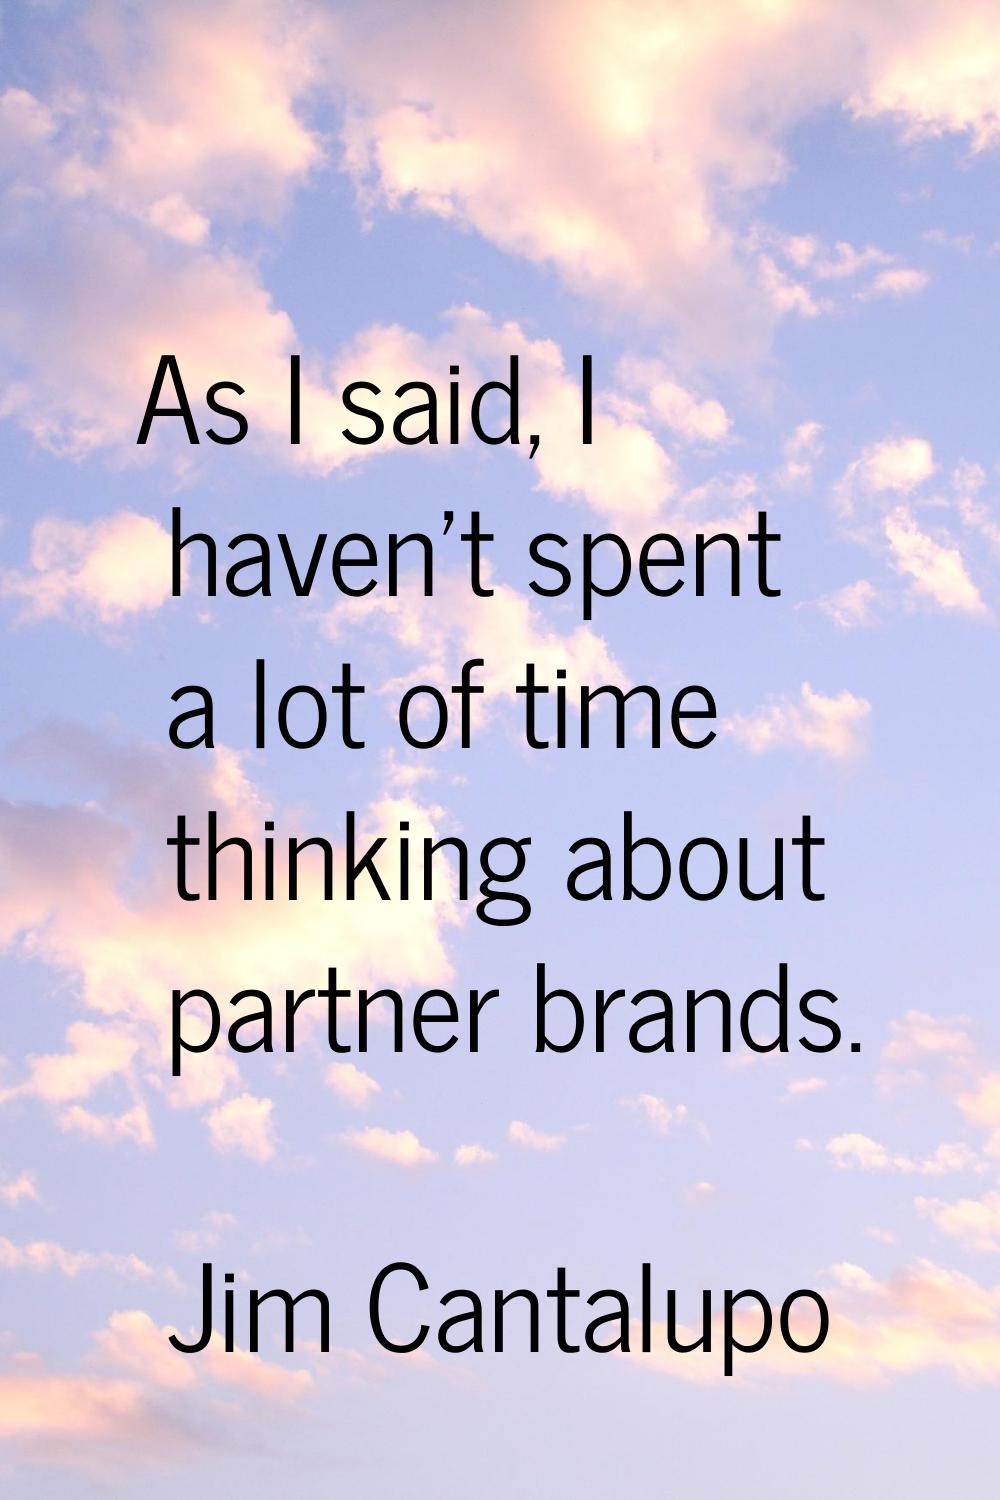 As I said, I haven't spent a lot of time thinking about partner brands.